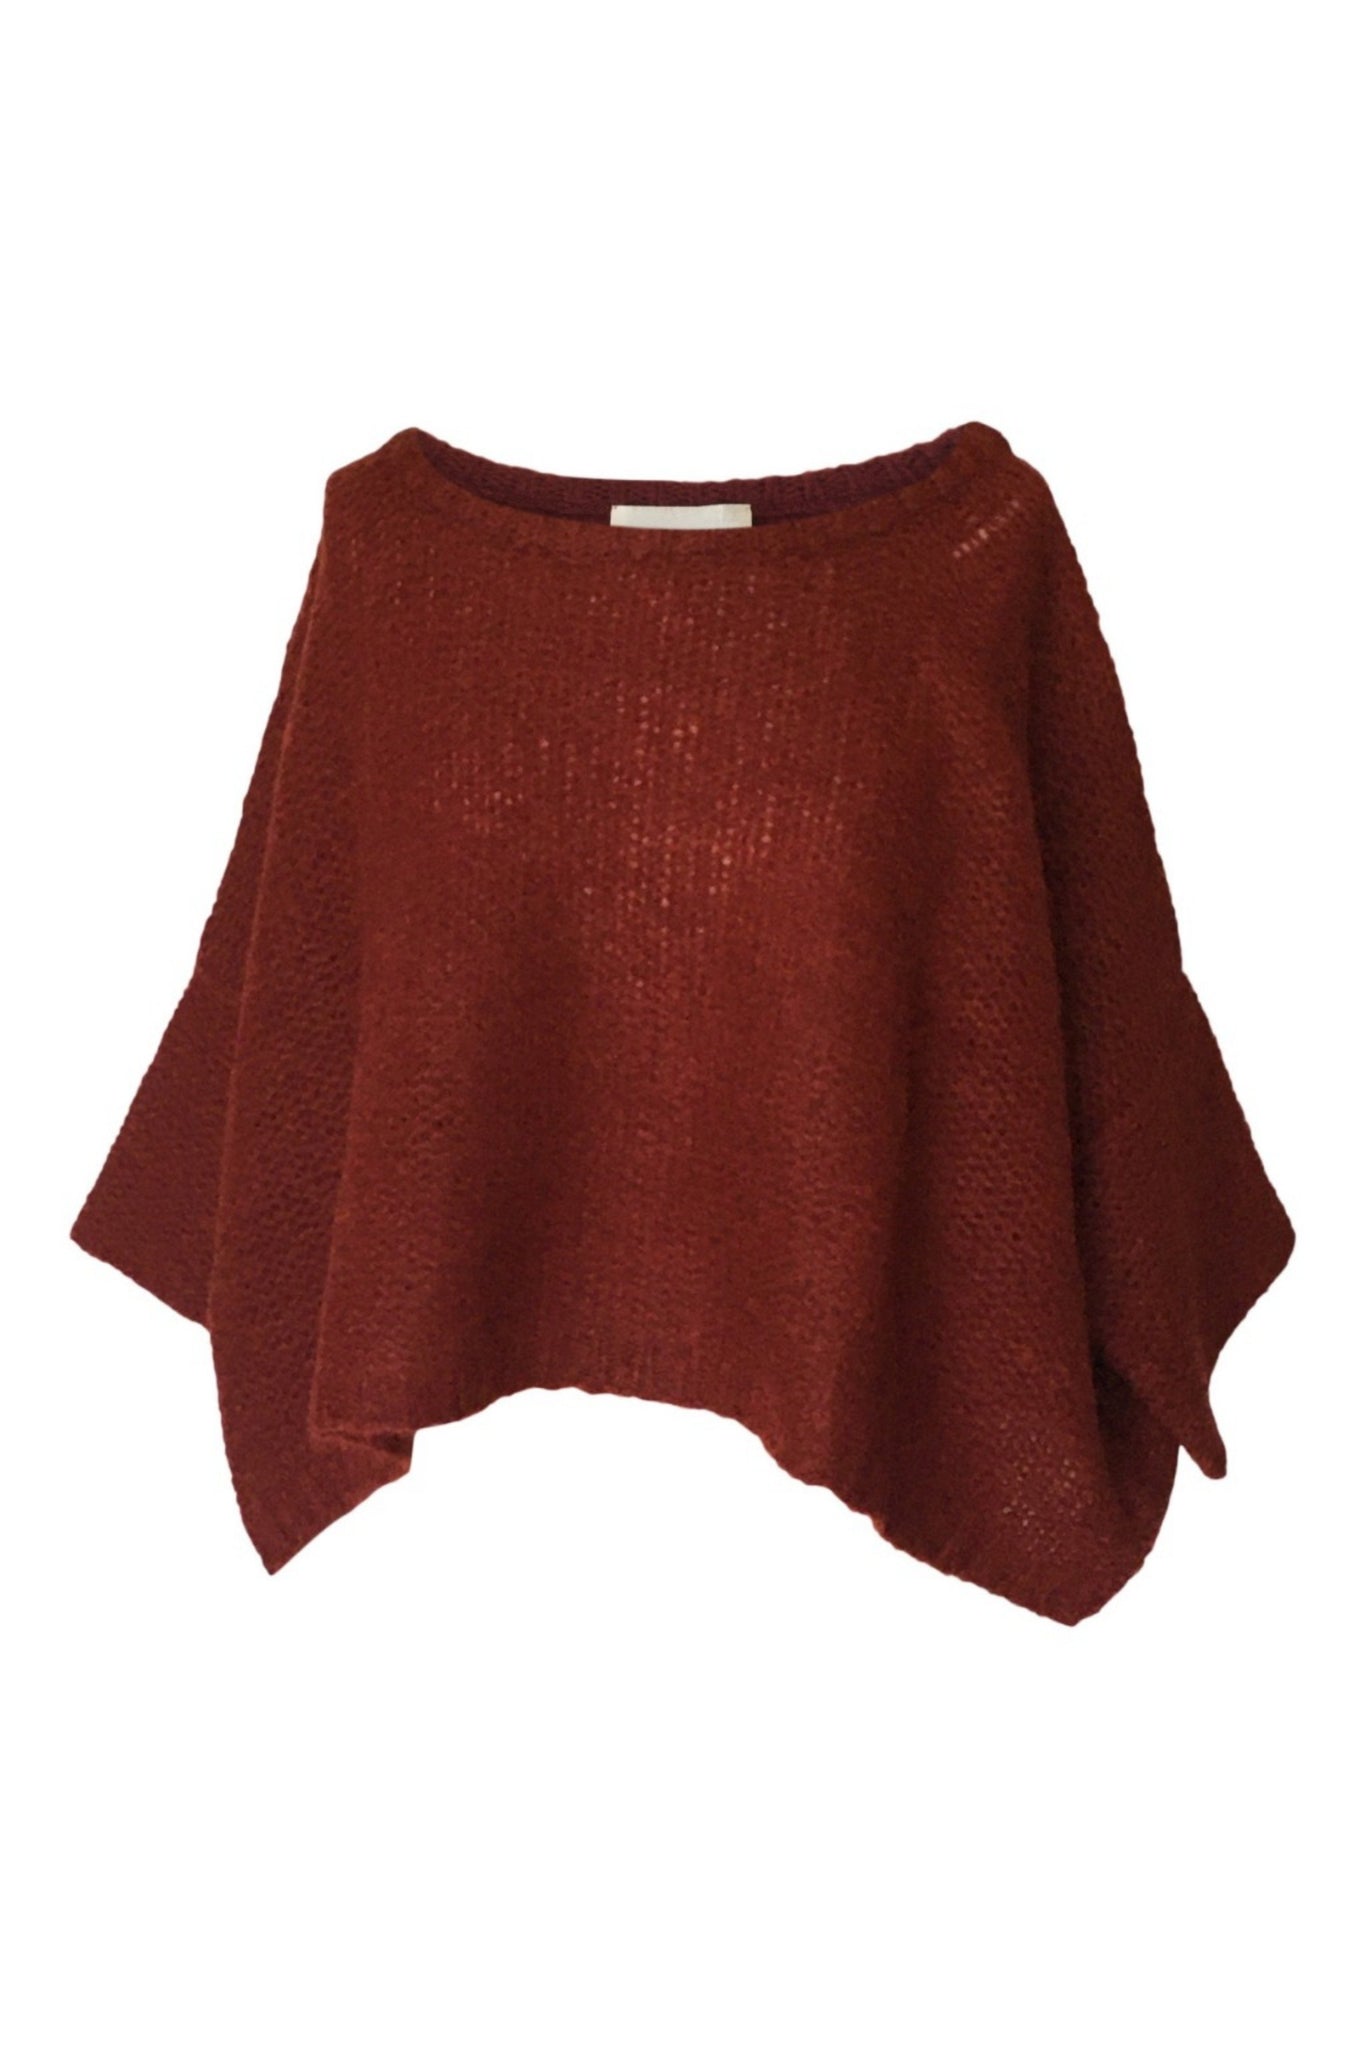 WDTS - Mohair Sweater - Berry